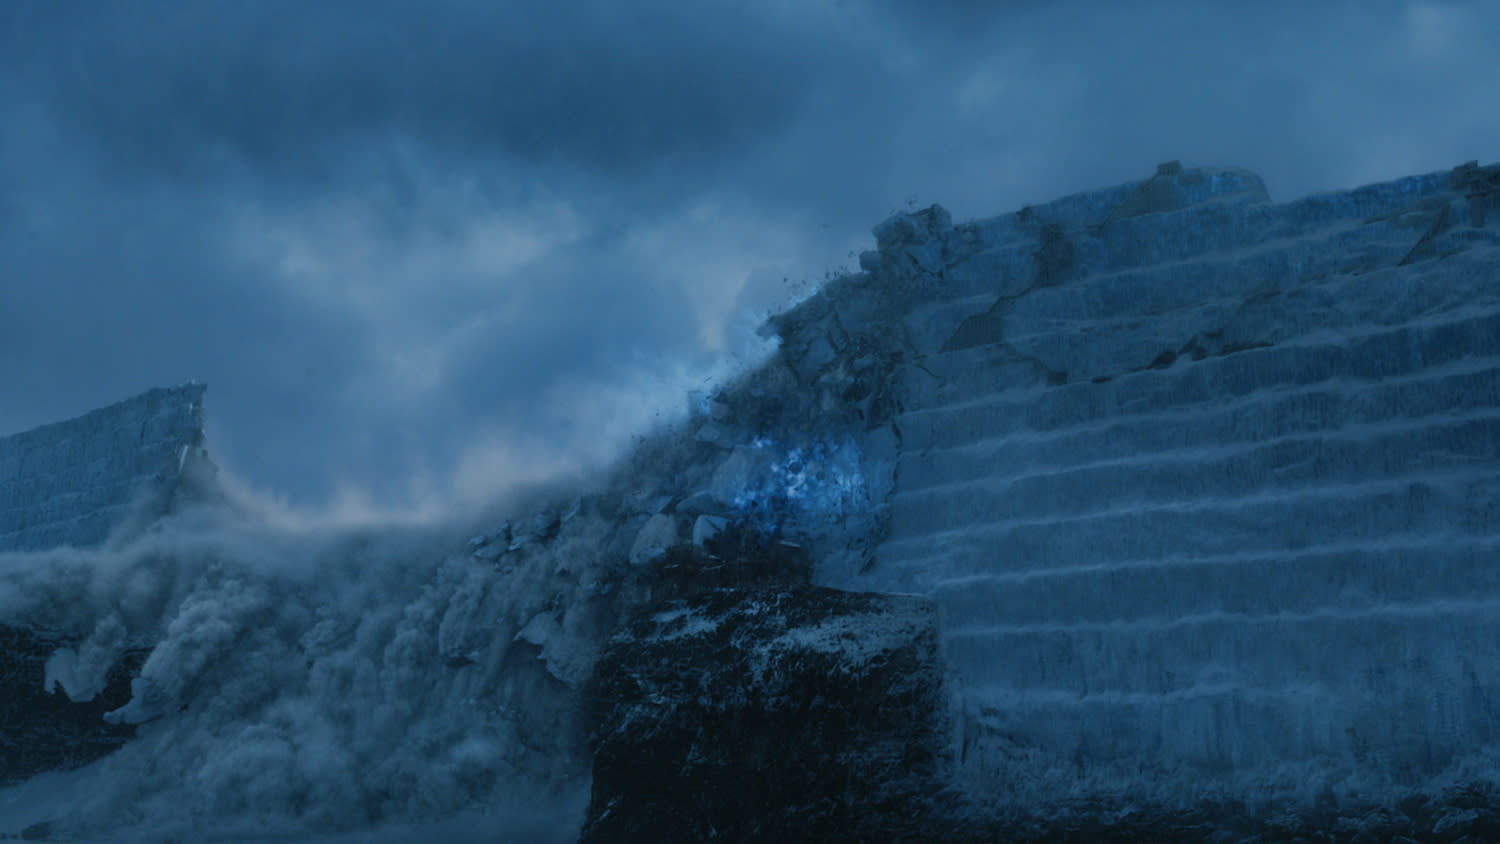 6 Dumb-as-Rocks Game Of Thrones Fan Theories (That Could Still Technically Be True)